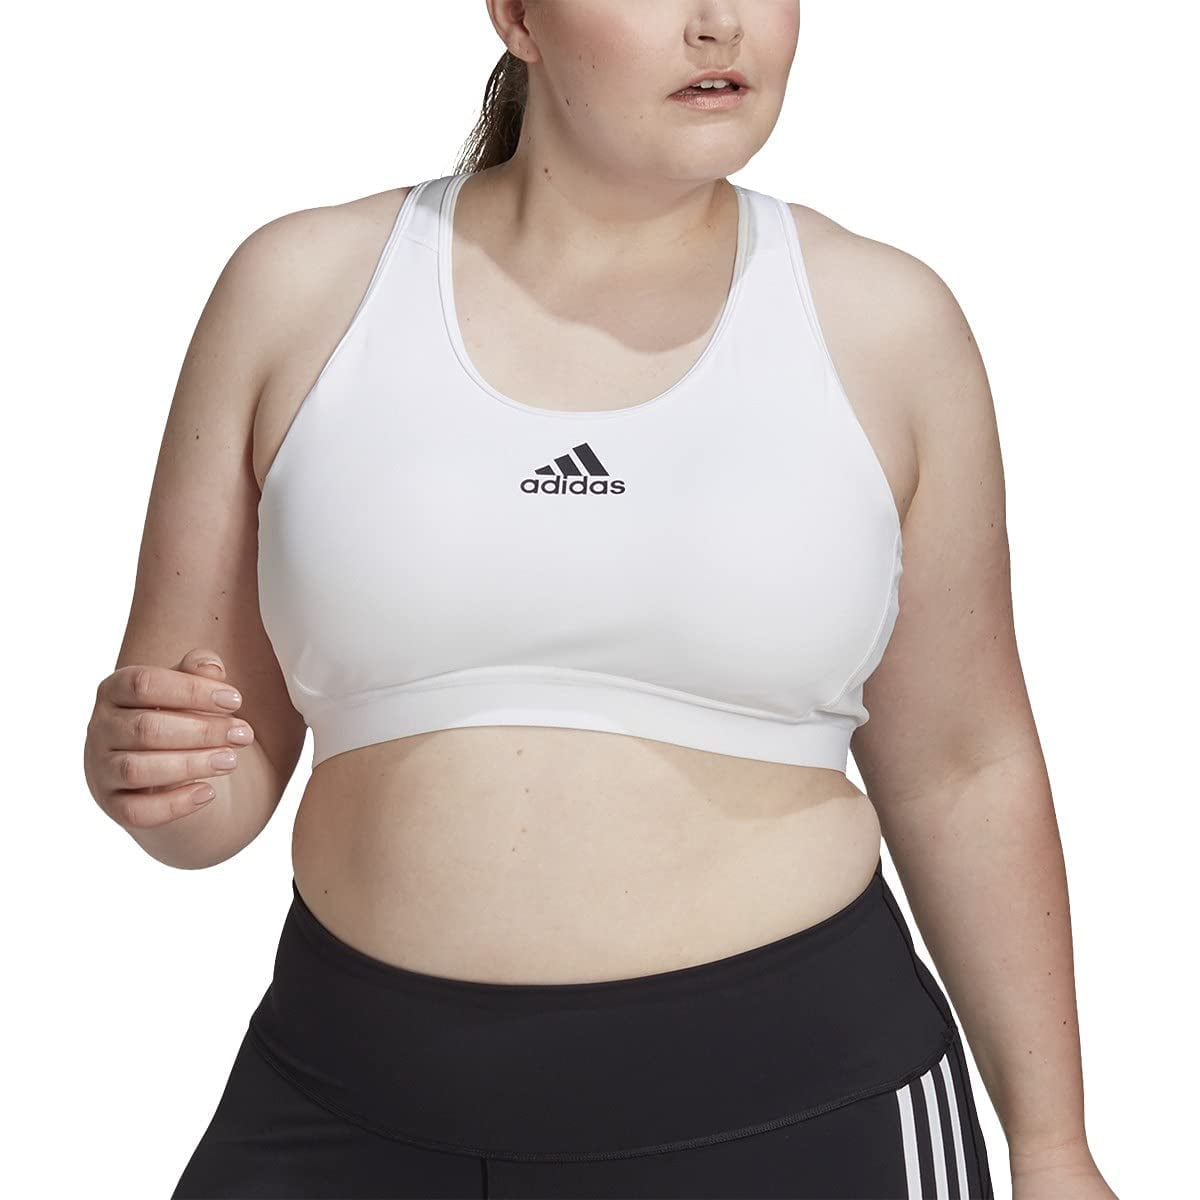 ADIDAS DOUBLE STRAP BRA TOP - CLEARANCE